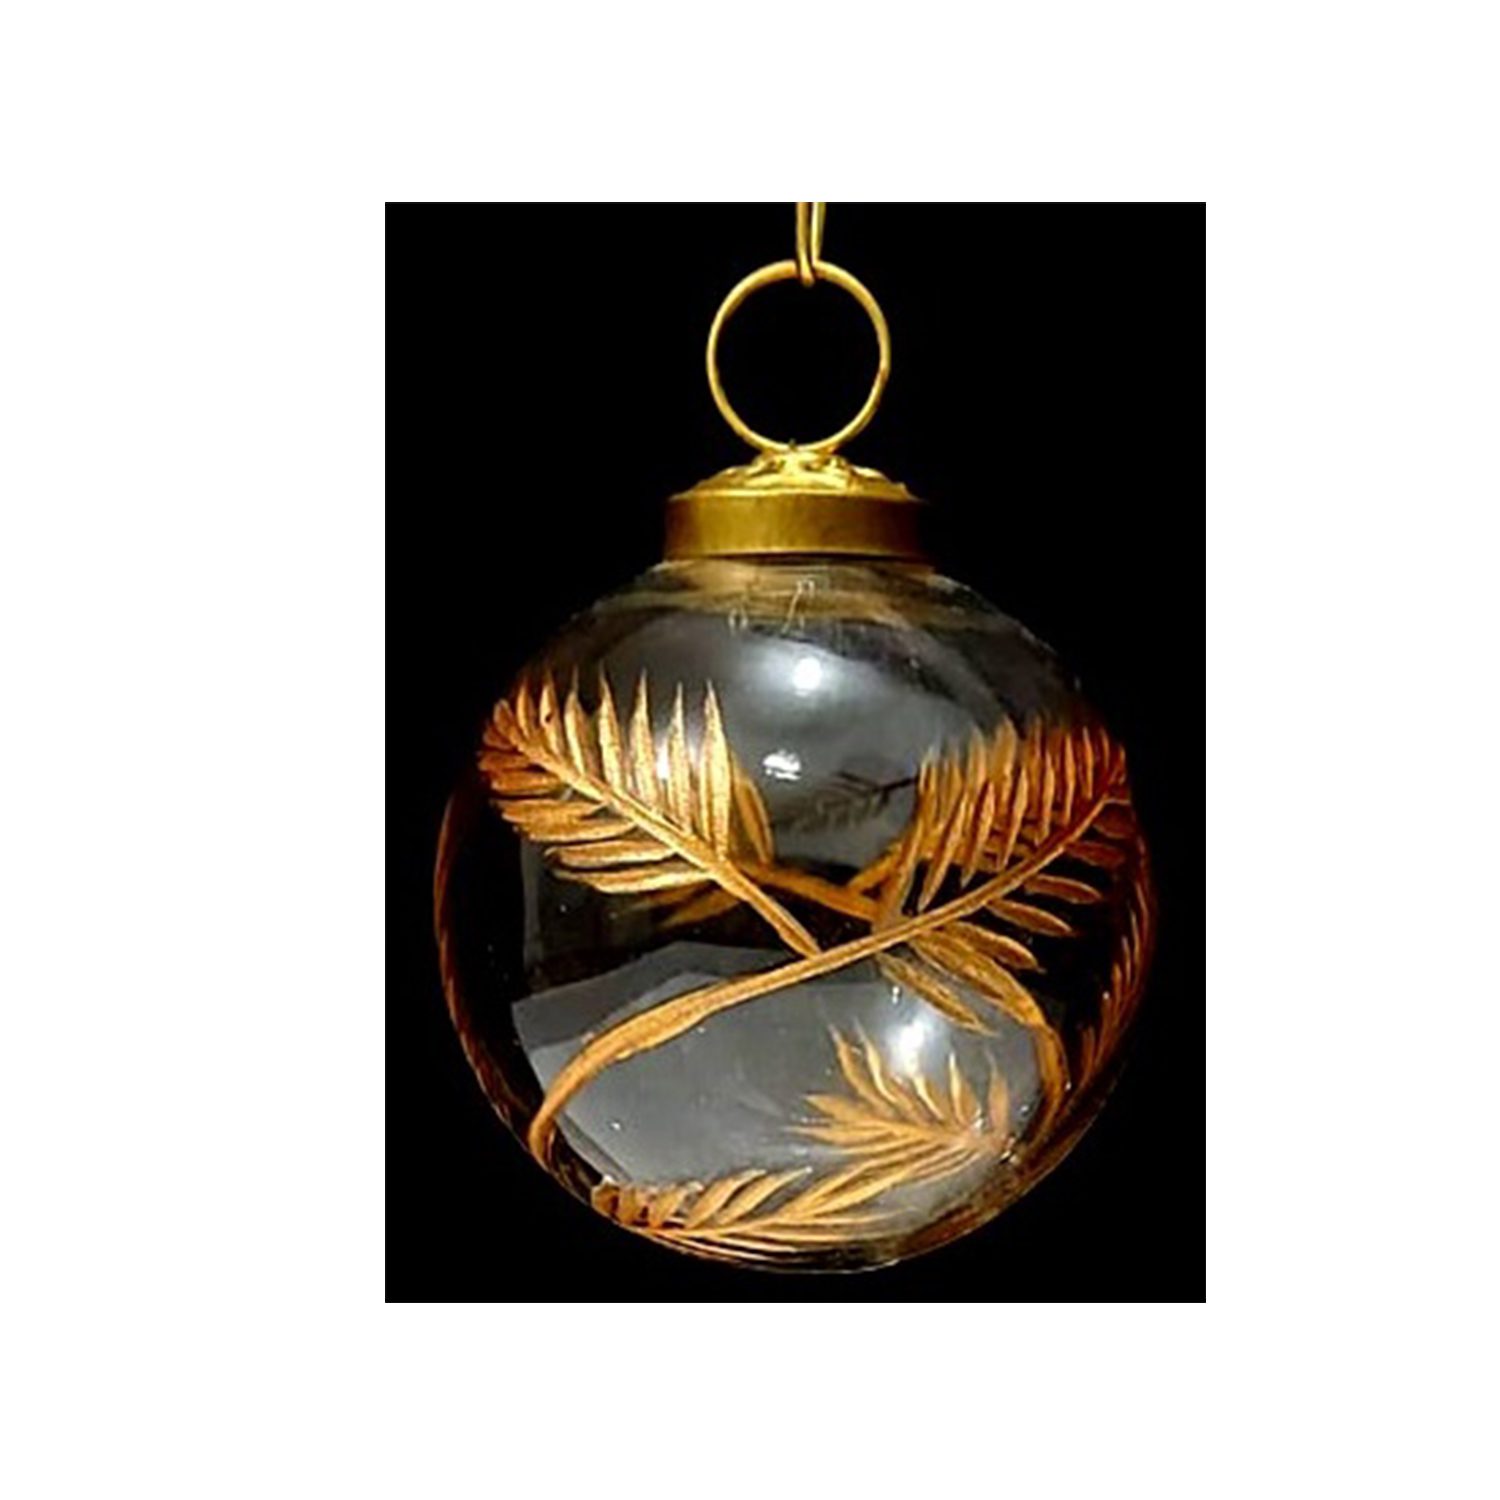 Jabin Glass Ornament, Transparent with Gold